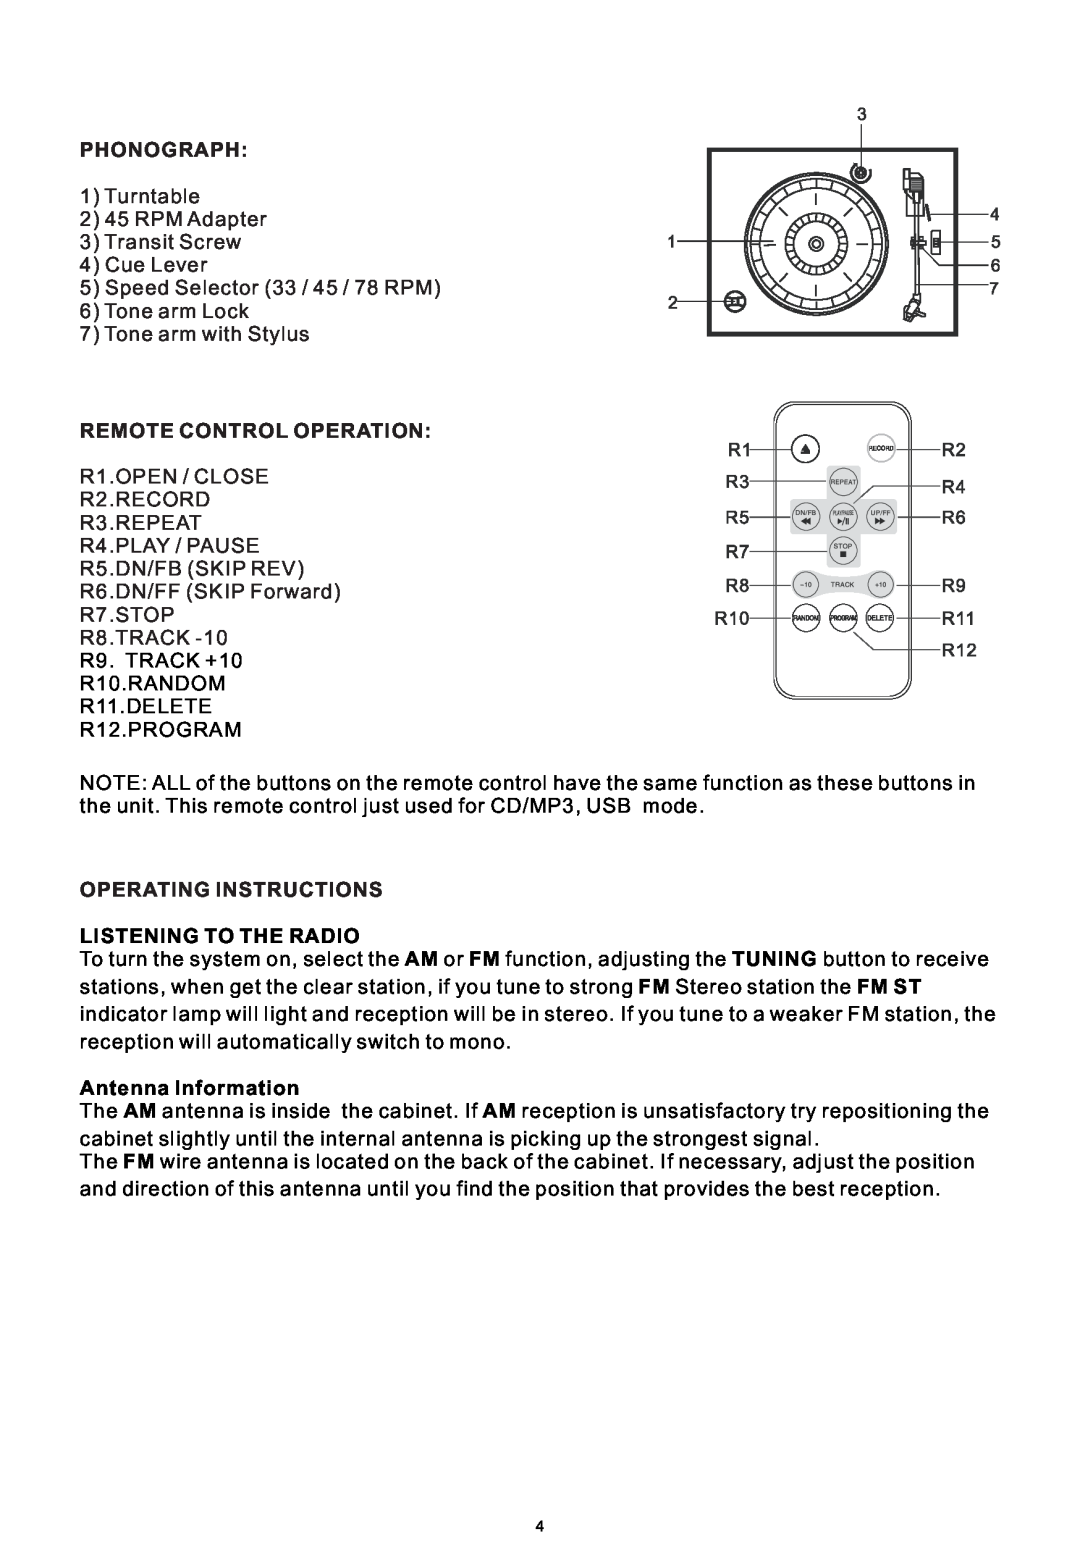 PYLE Audio PTCDS2UI manual Phonograph, Remote Control Operation, Operating Instructions Listening To The Radio 